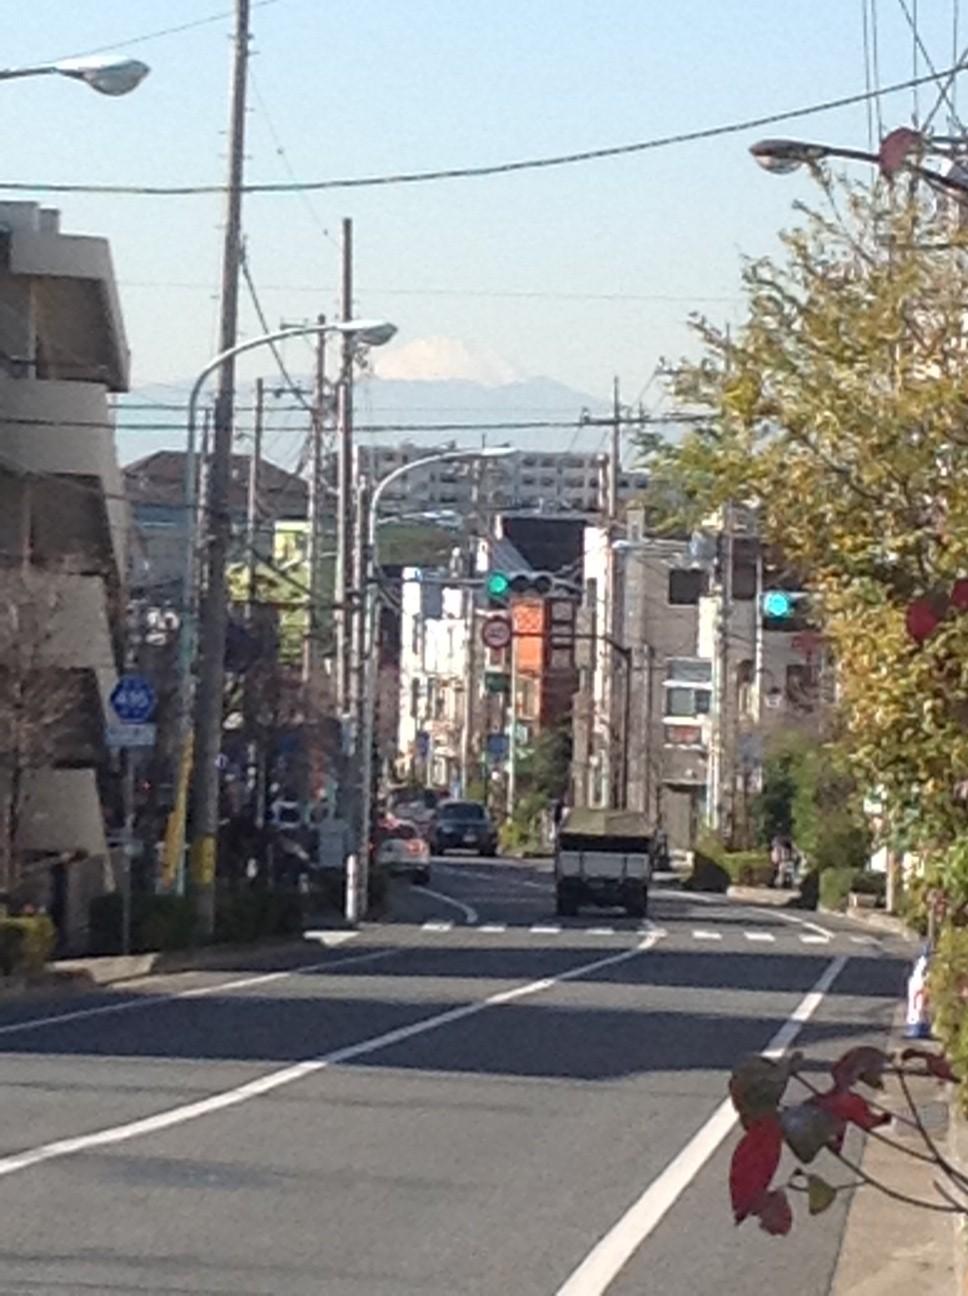 Other local. From the south side of the front road, Overlook Mount Fuji. 